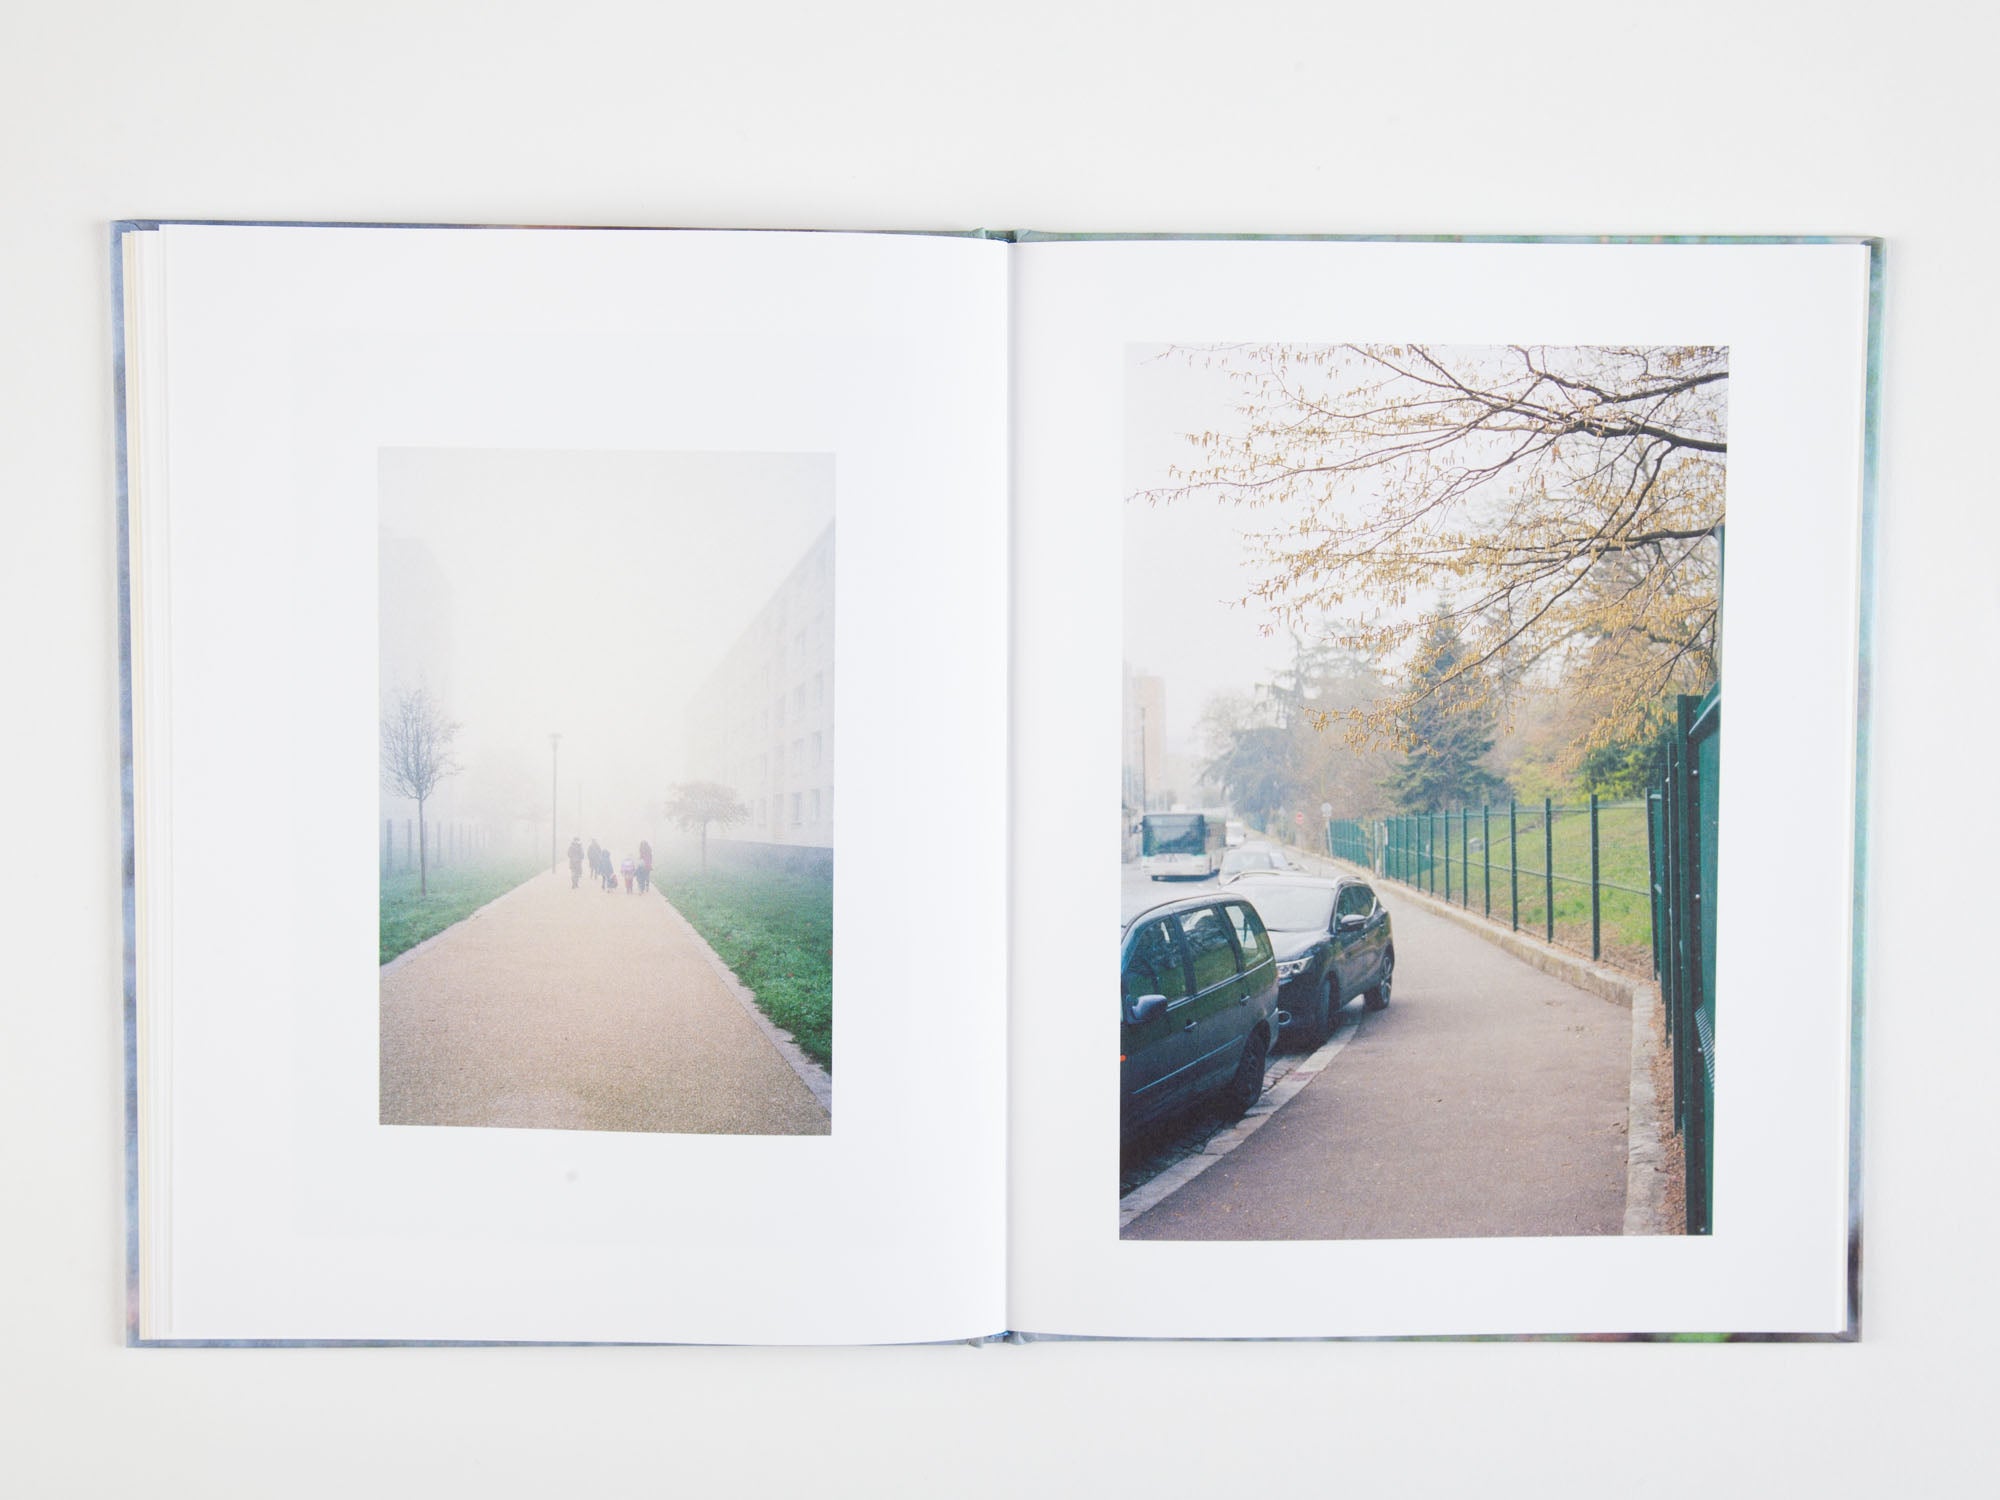 Notes on Ordinary Spaces by Ola Rindal – Citizen Editions